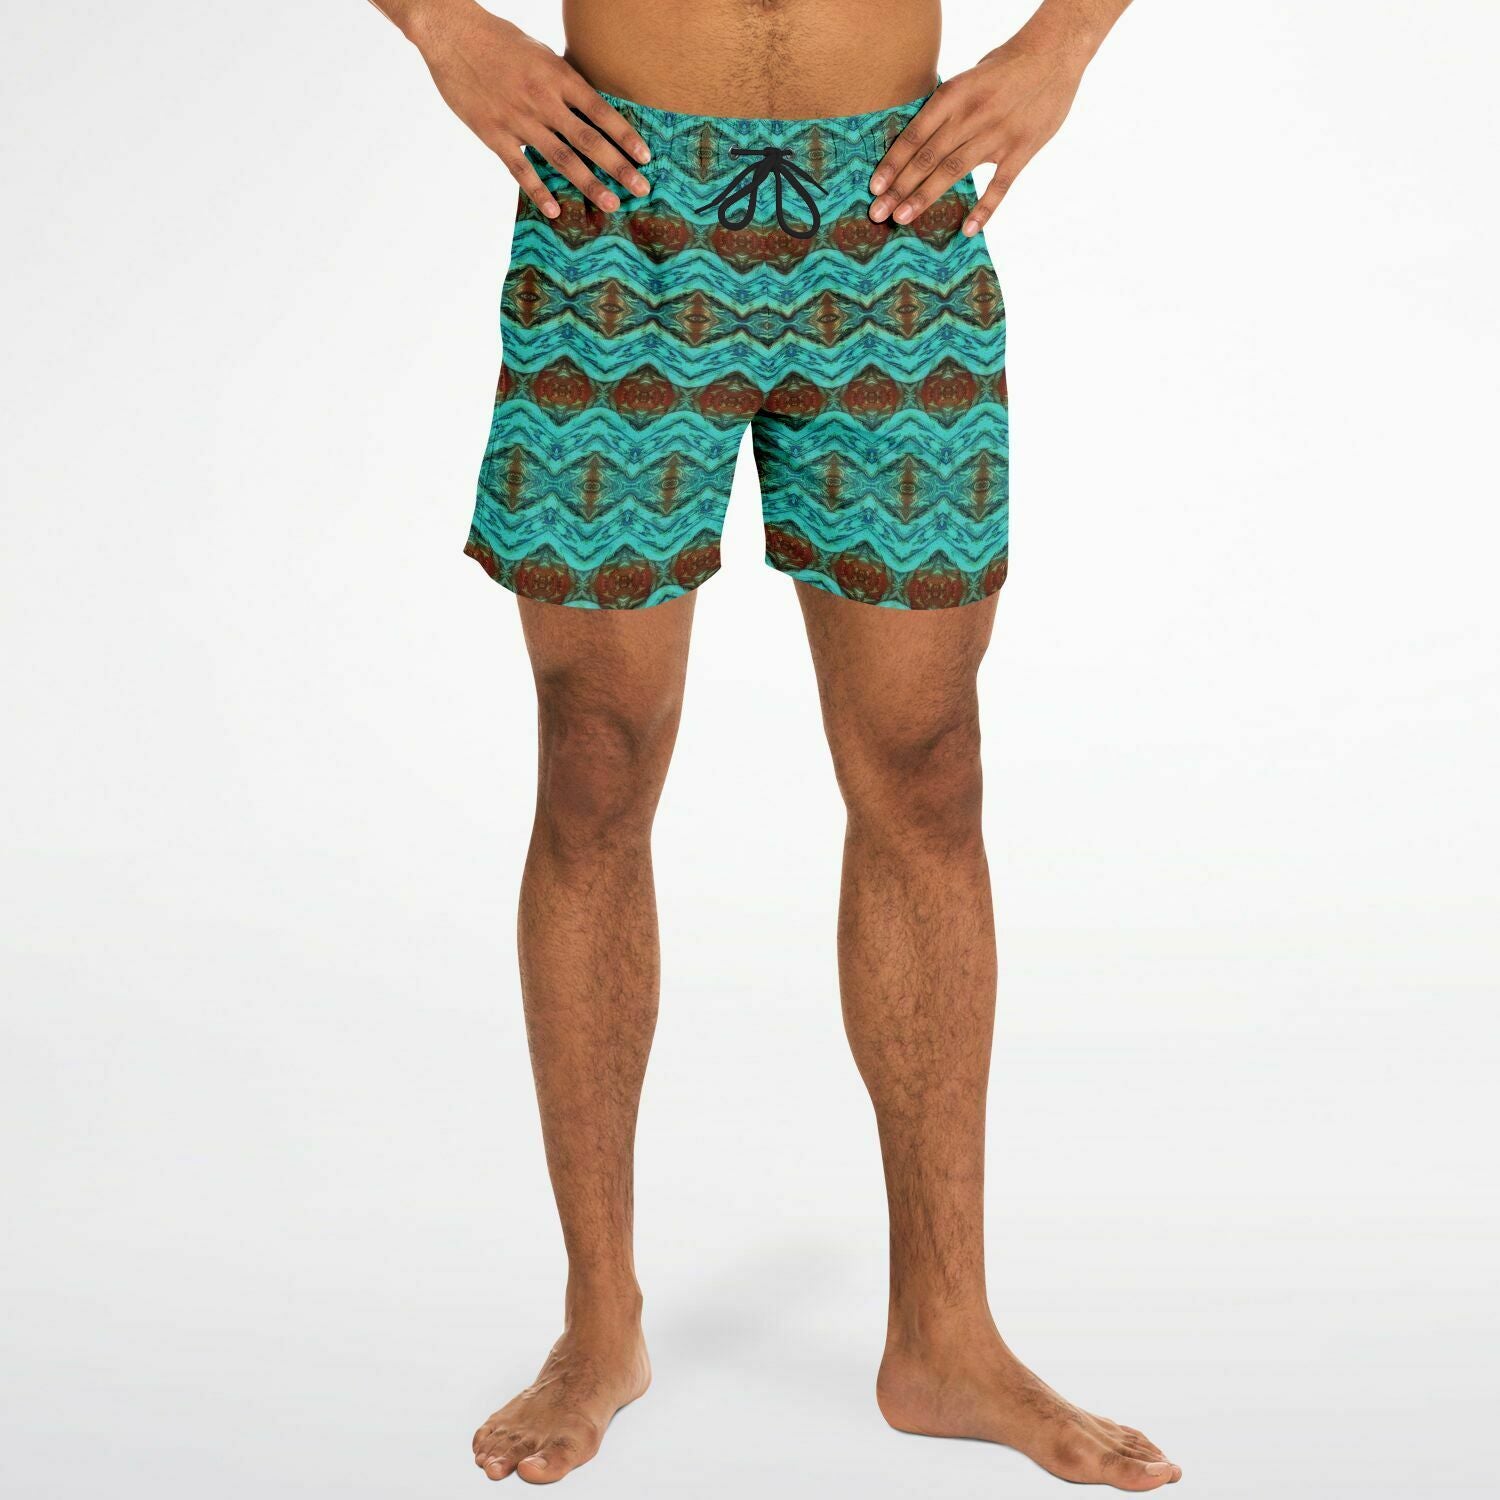 Mens Bathing Suit swimshort style in aqua blue with brown 